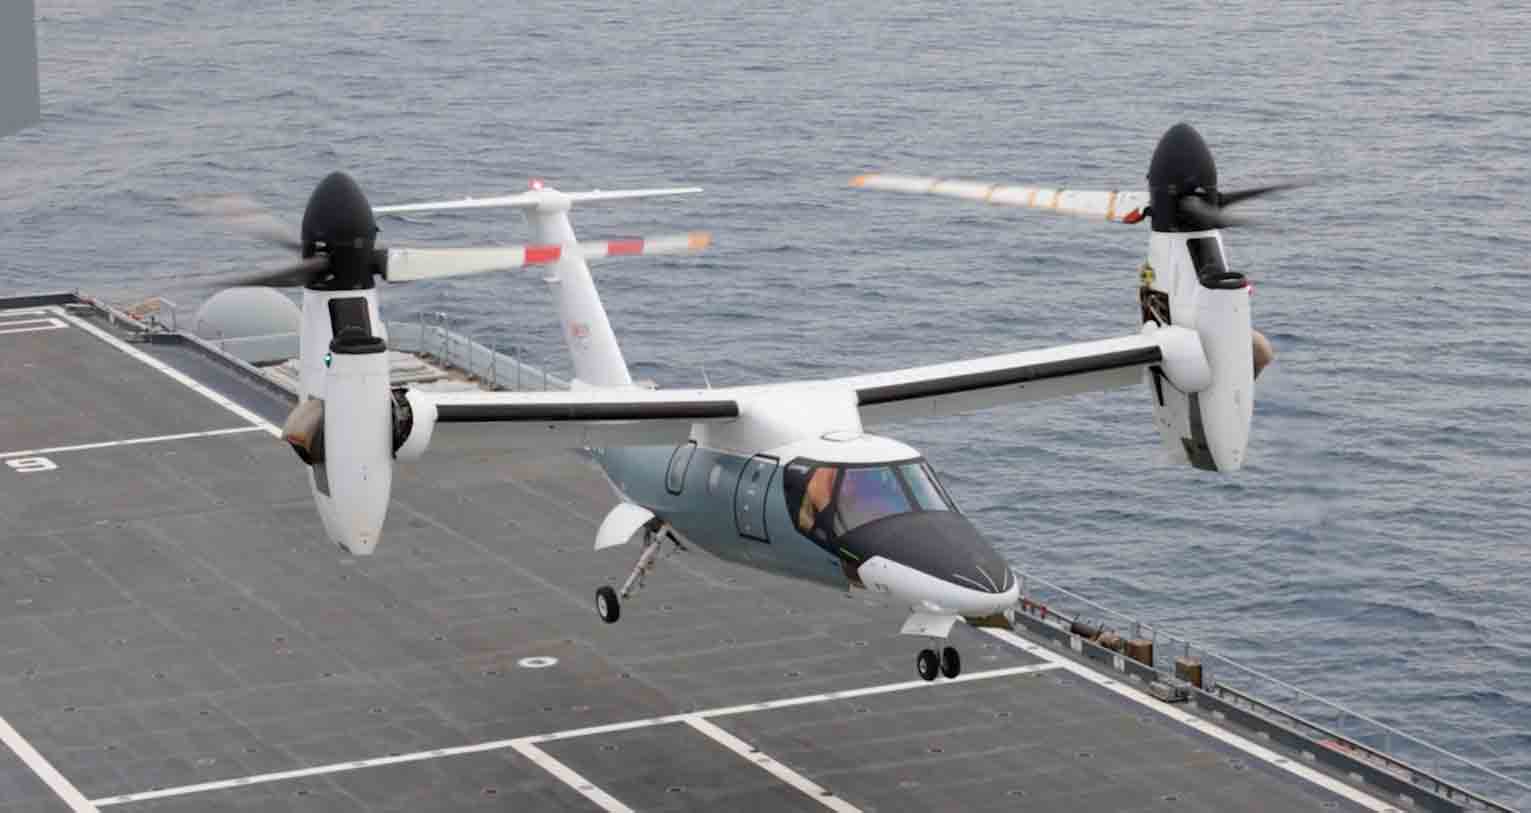 Tiltrotor AW609. Source and images: Leonardo Press Release